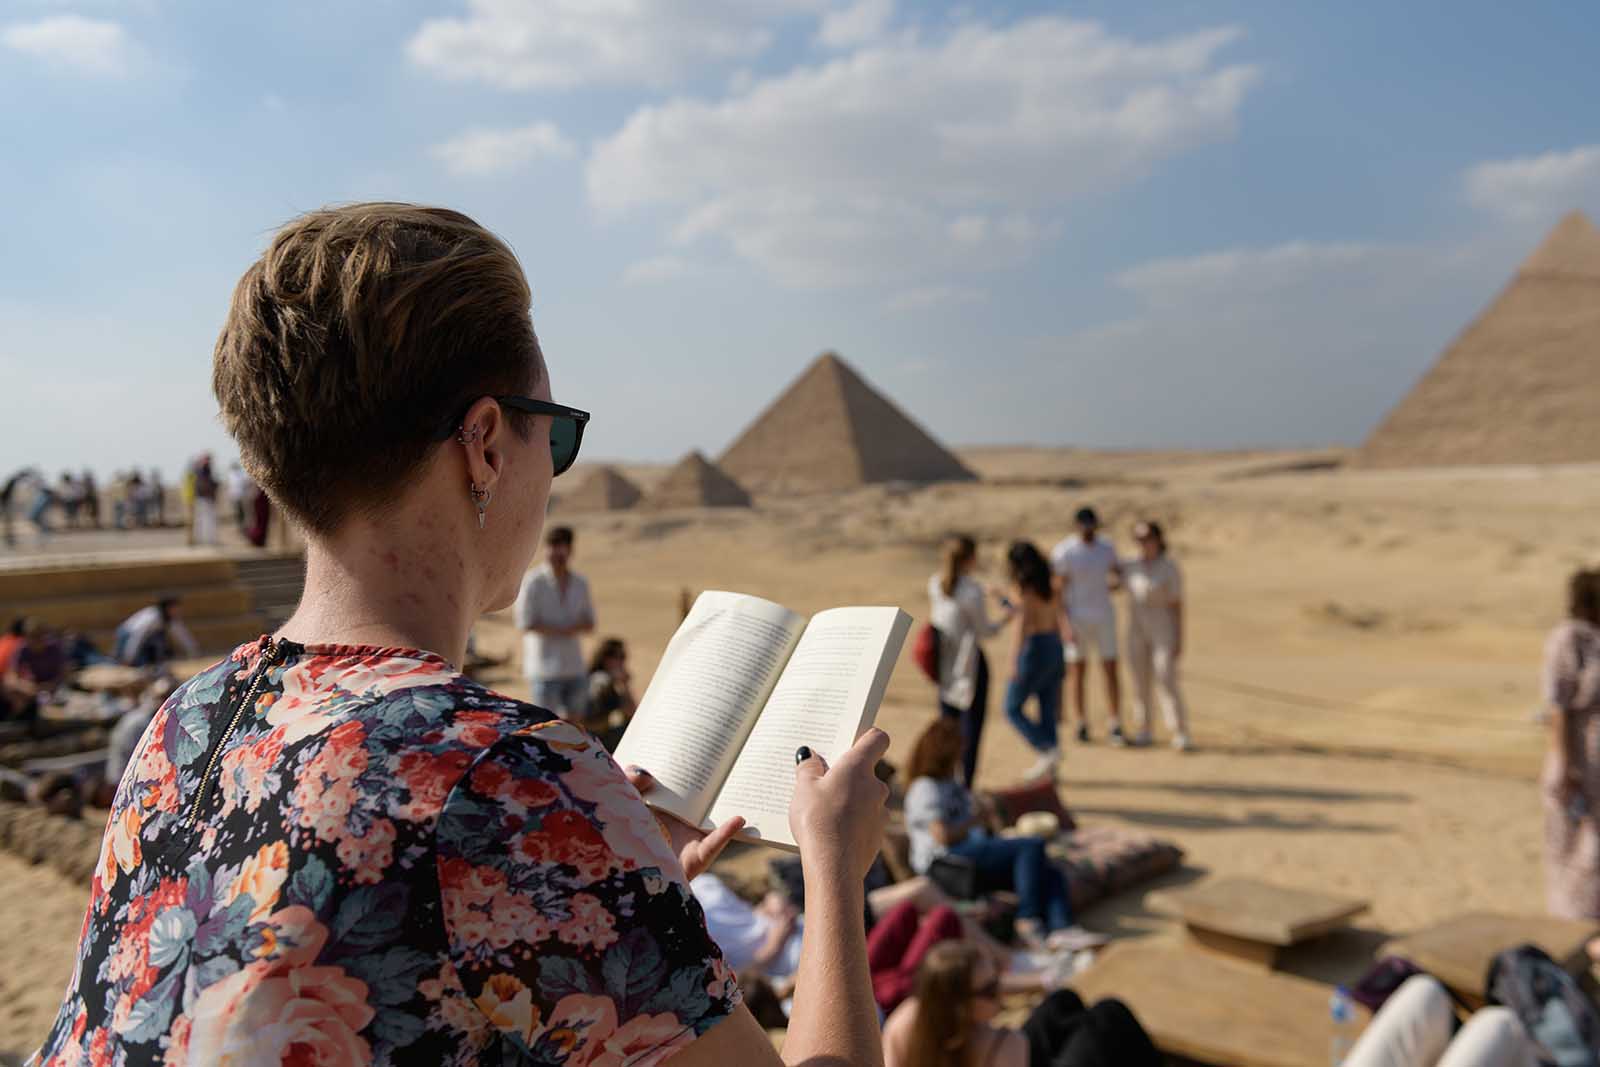 female student reading about the pyramids of Giza at archeological site